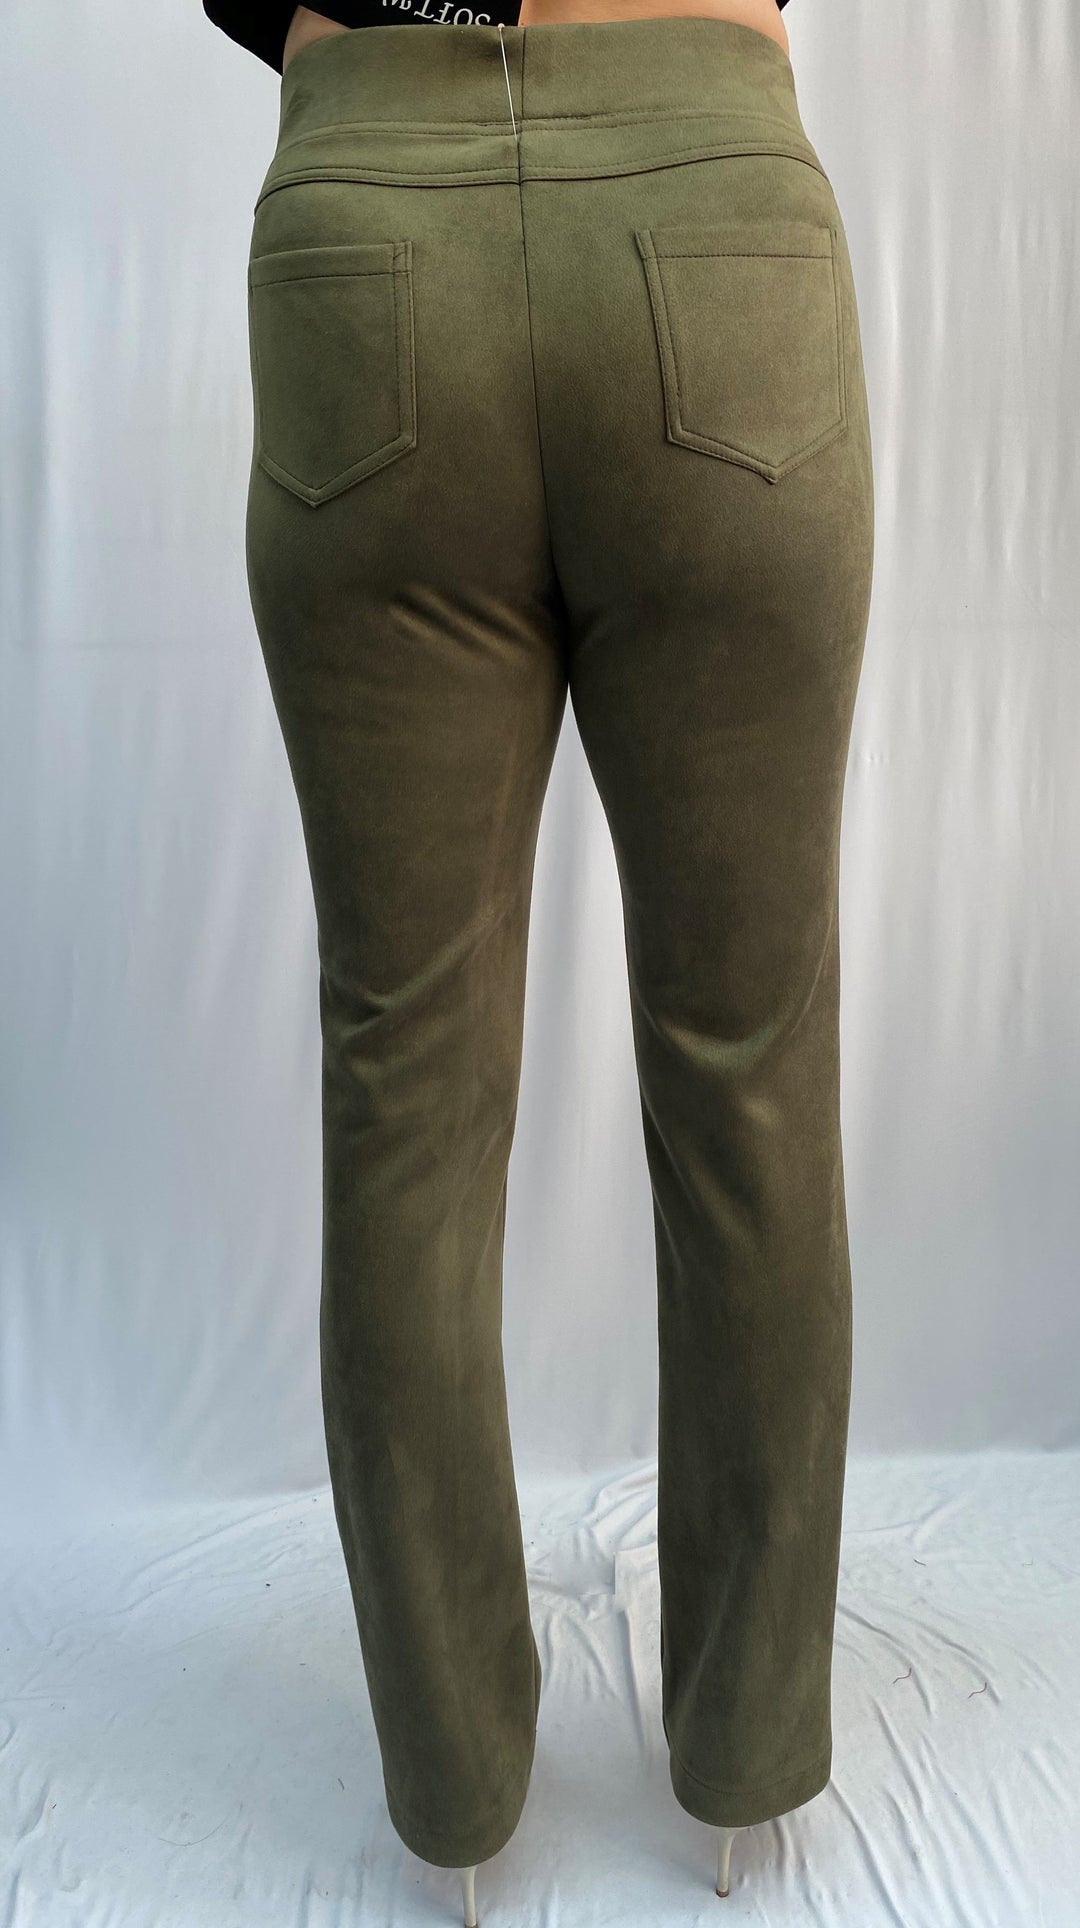 Suede Western Style Pants